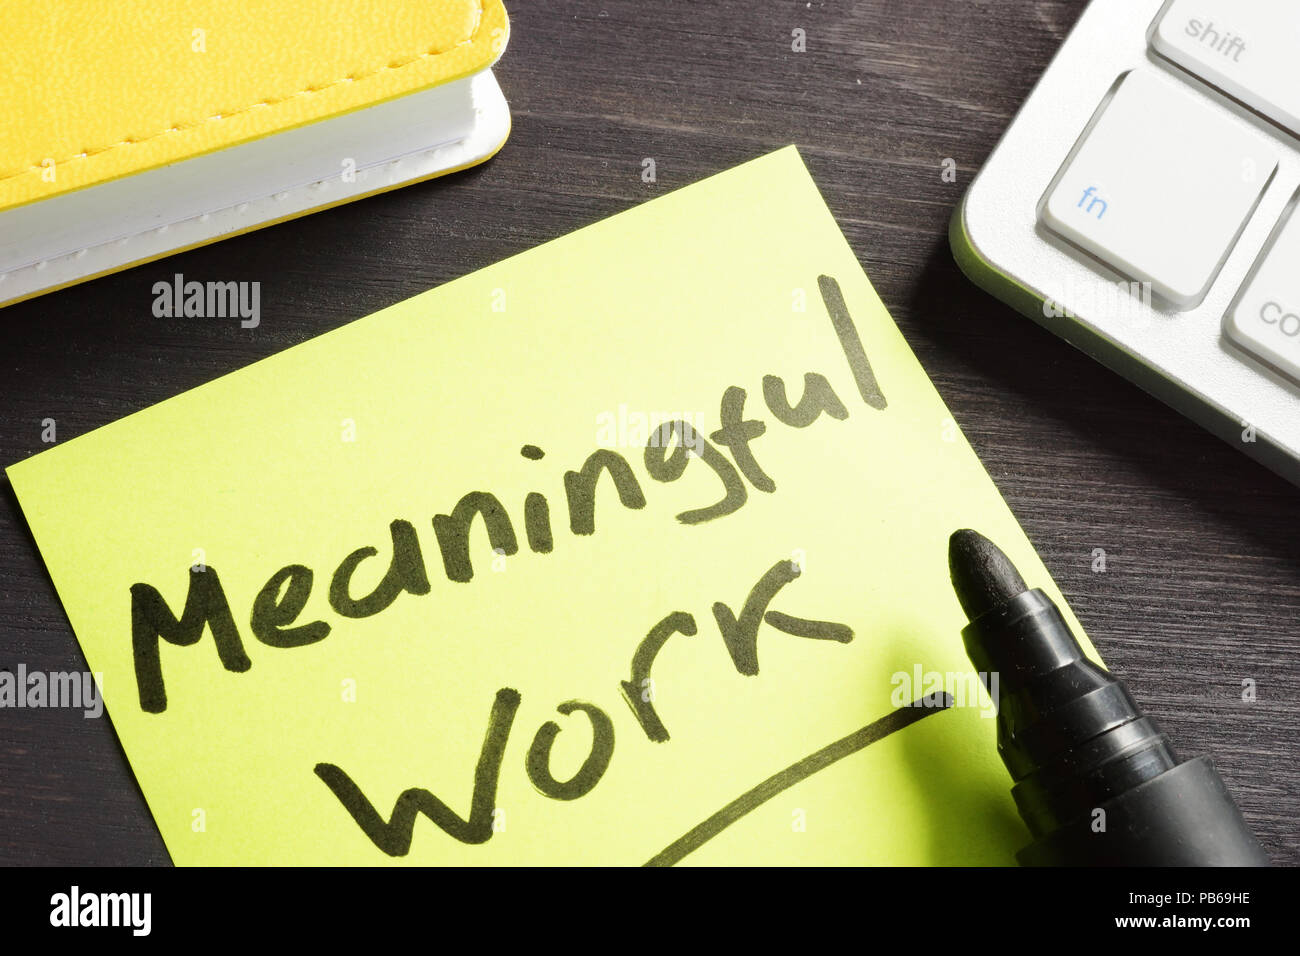 Meaningful Work written on a memo stick. Stock Photo